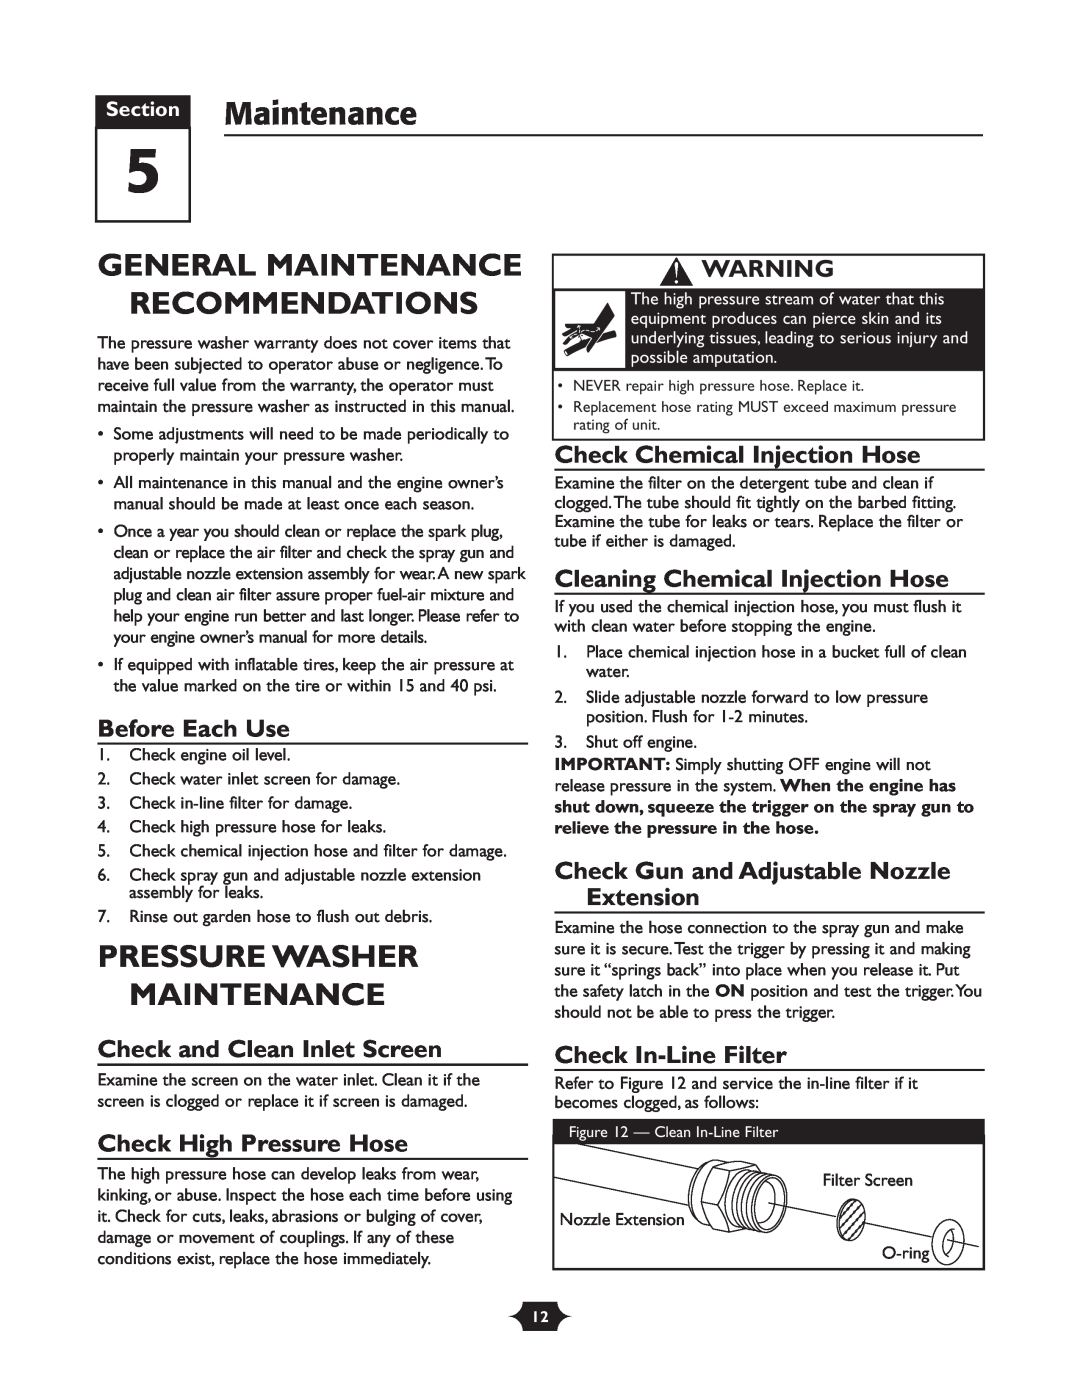 Troy-Bilt 20207 Section Maintenance, General Maintenance Recommendations, Pressure Washer Maintenance, Before Each Use 